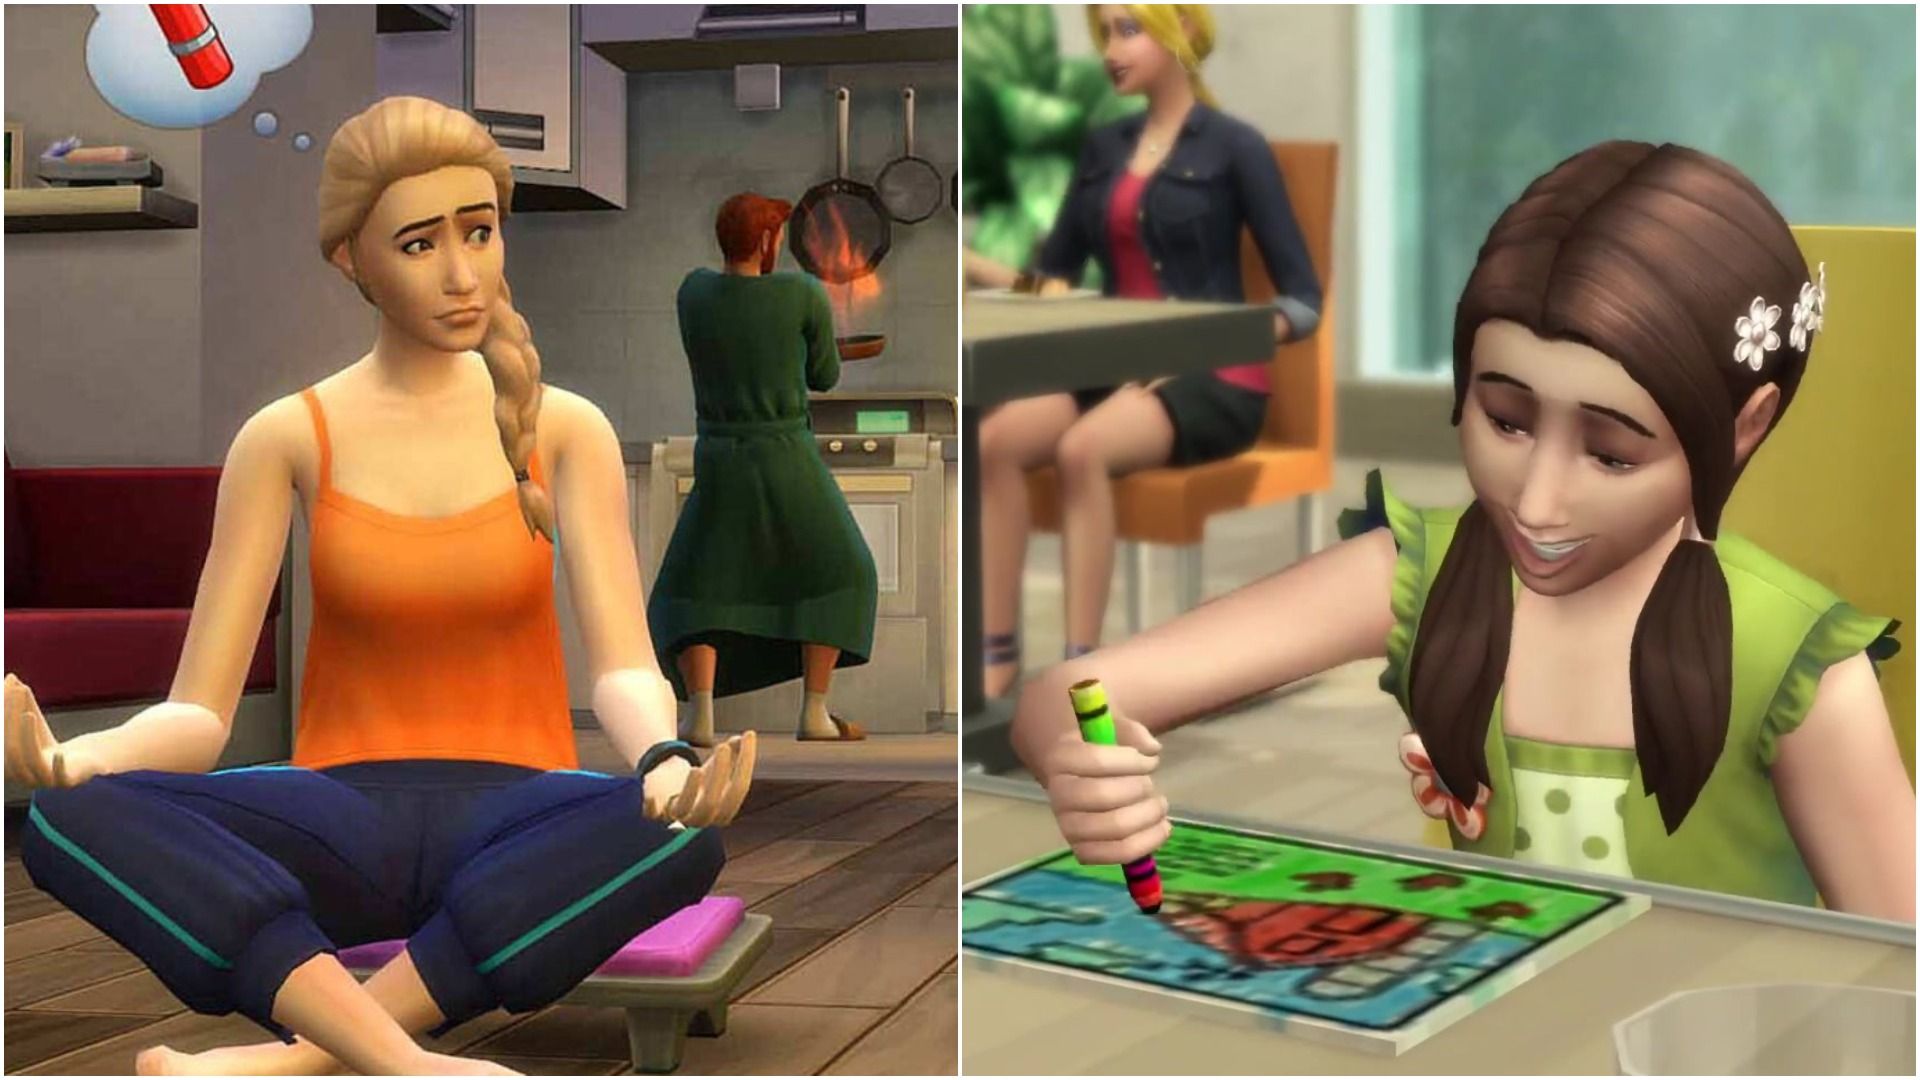 On the left, a meditating Sim is distracted by their less-than-stellar chef of a partner. On the right, a child draws on a restaurant kid's menu